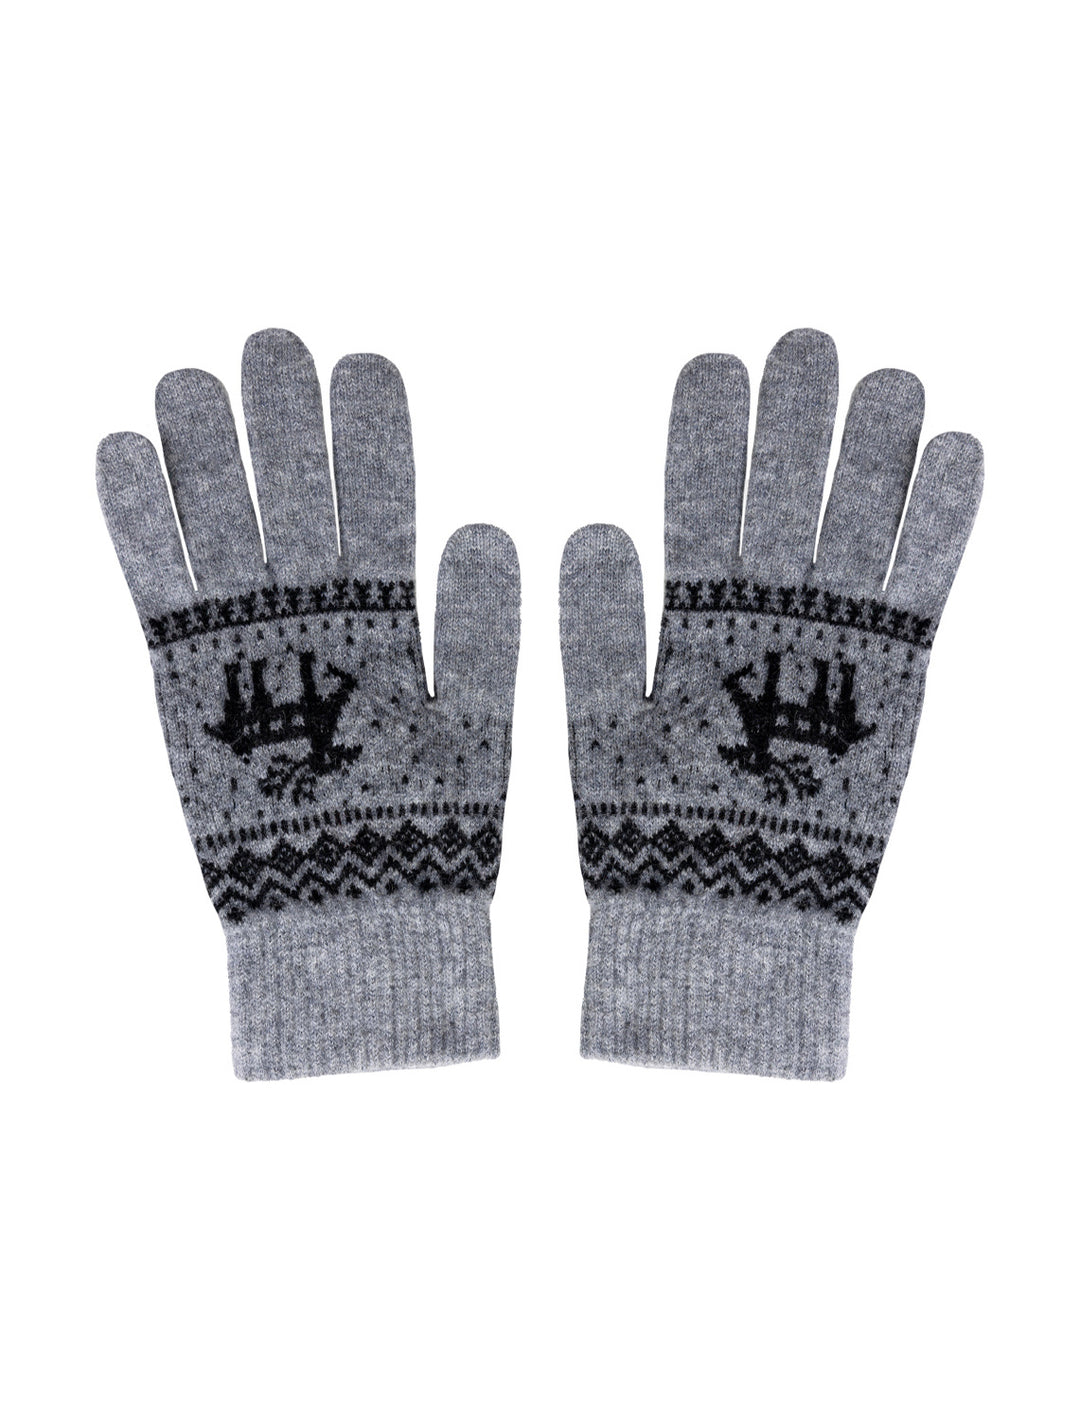 Overhead view of Jumper 1234's reindeer gloves in cloudy and black